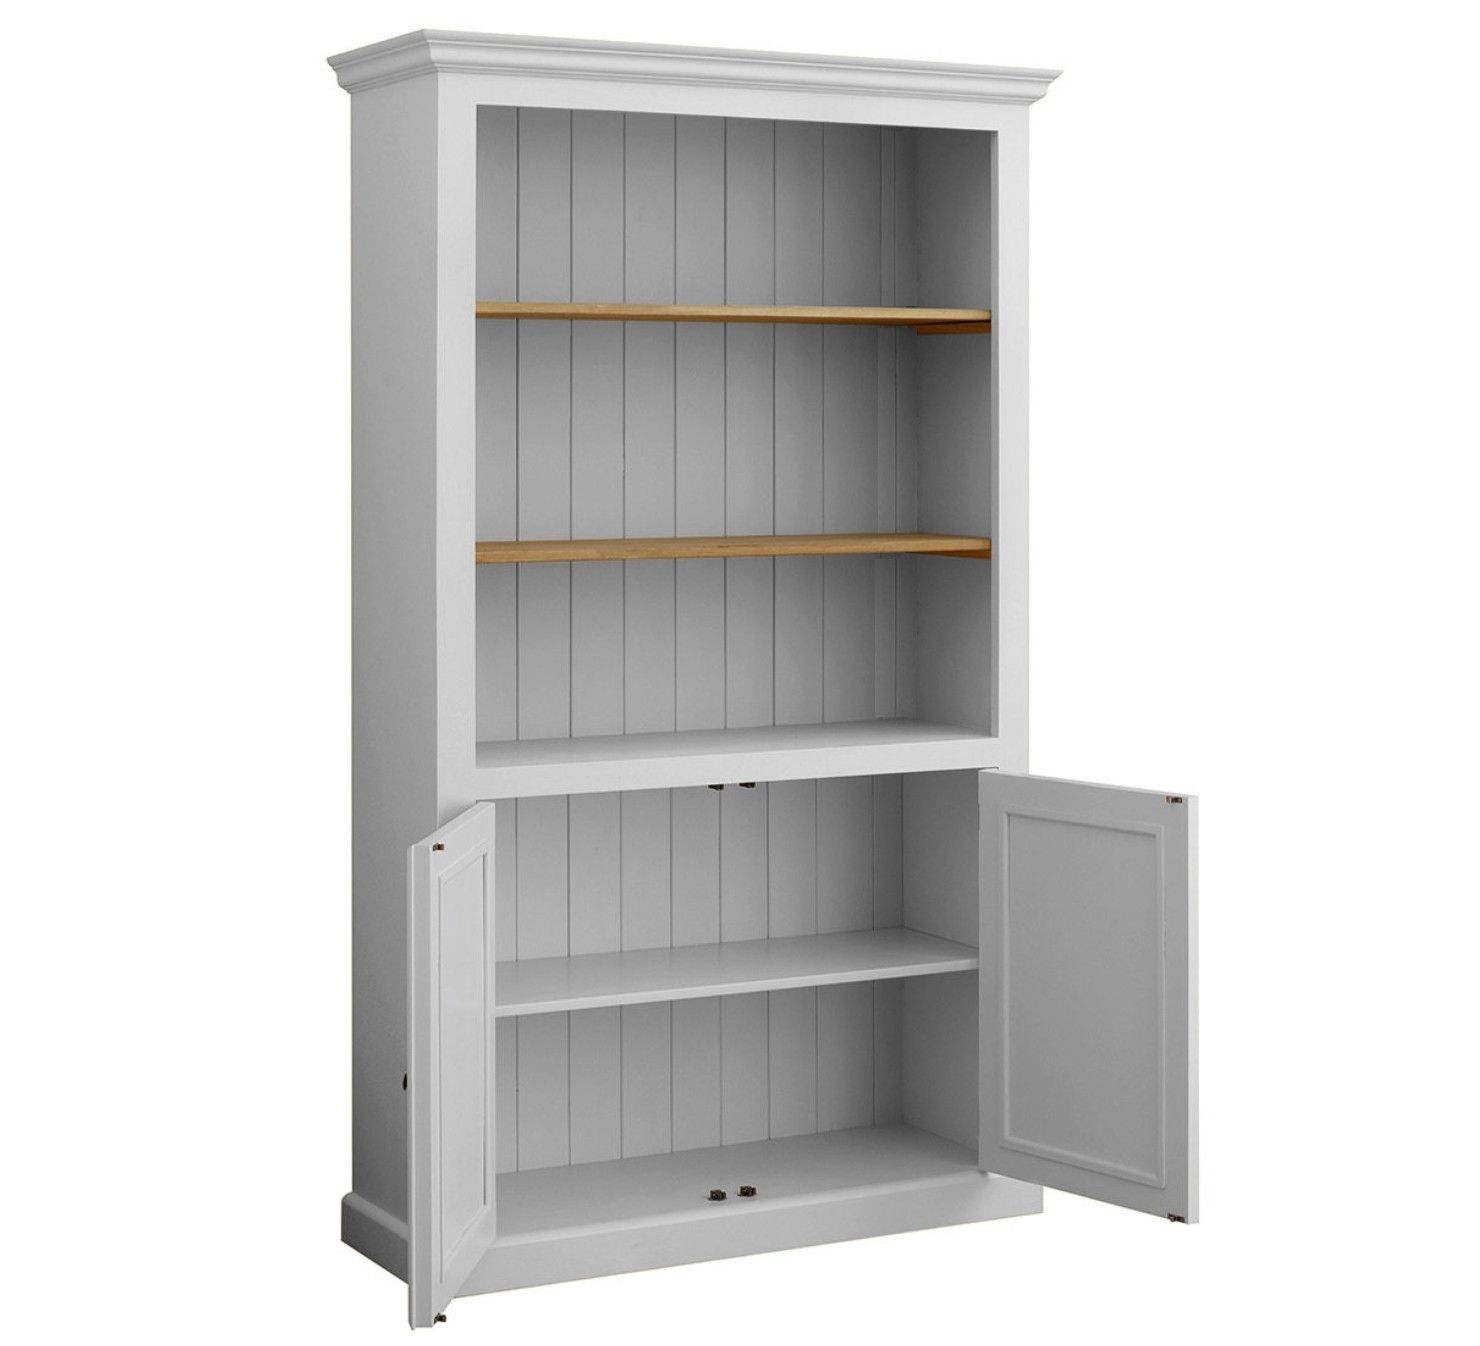 Newest Bookcases With Cupboard With Regard To Bookcases Ideas: Bookcases And Bookshelves Shop The Best Deals For (View 1 of 15)